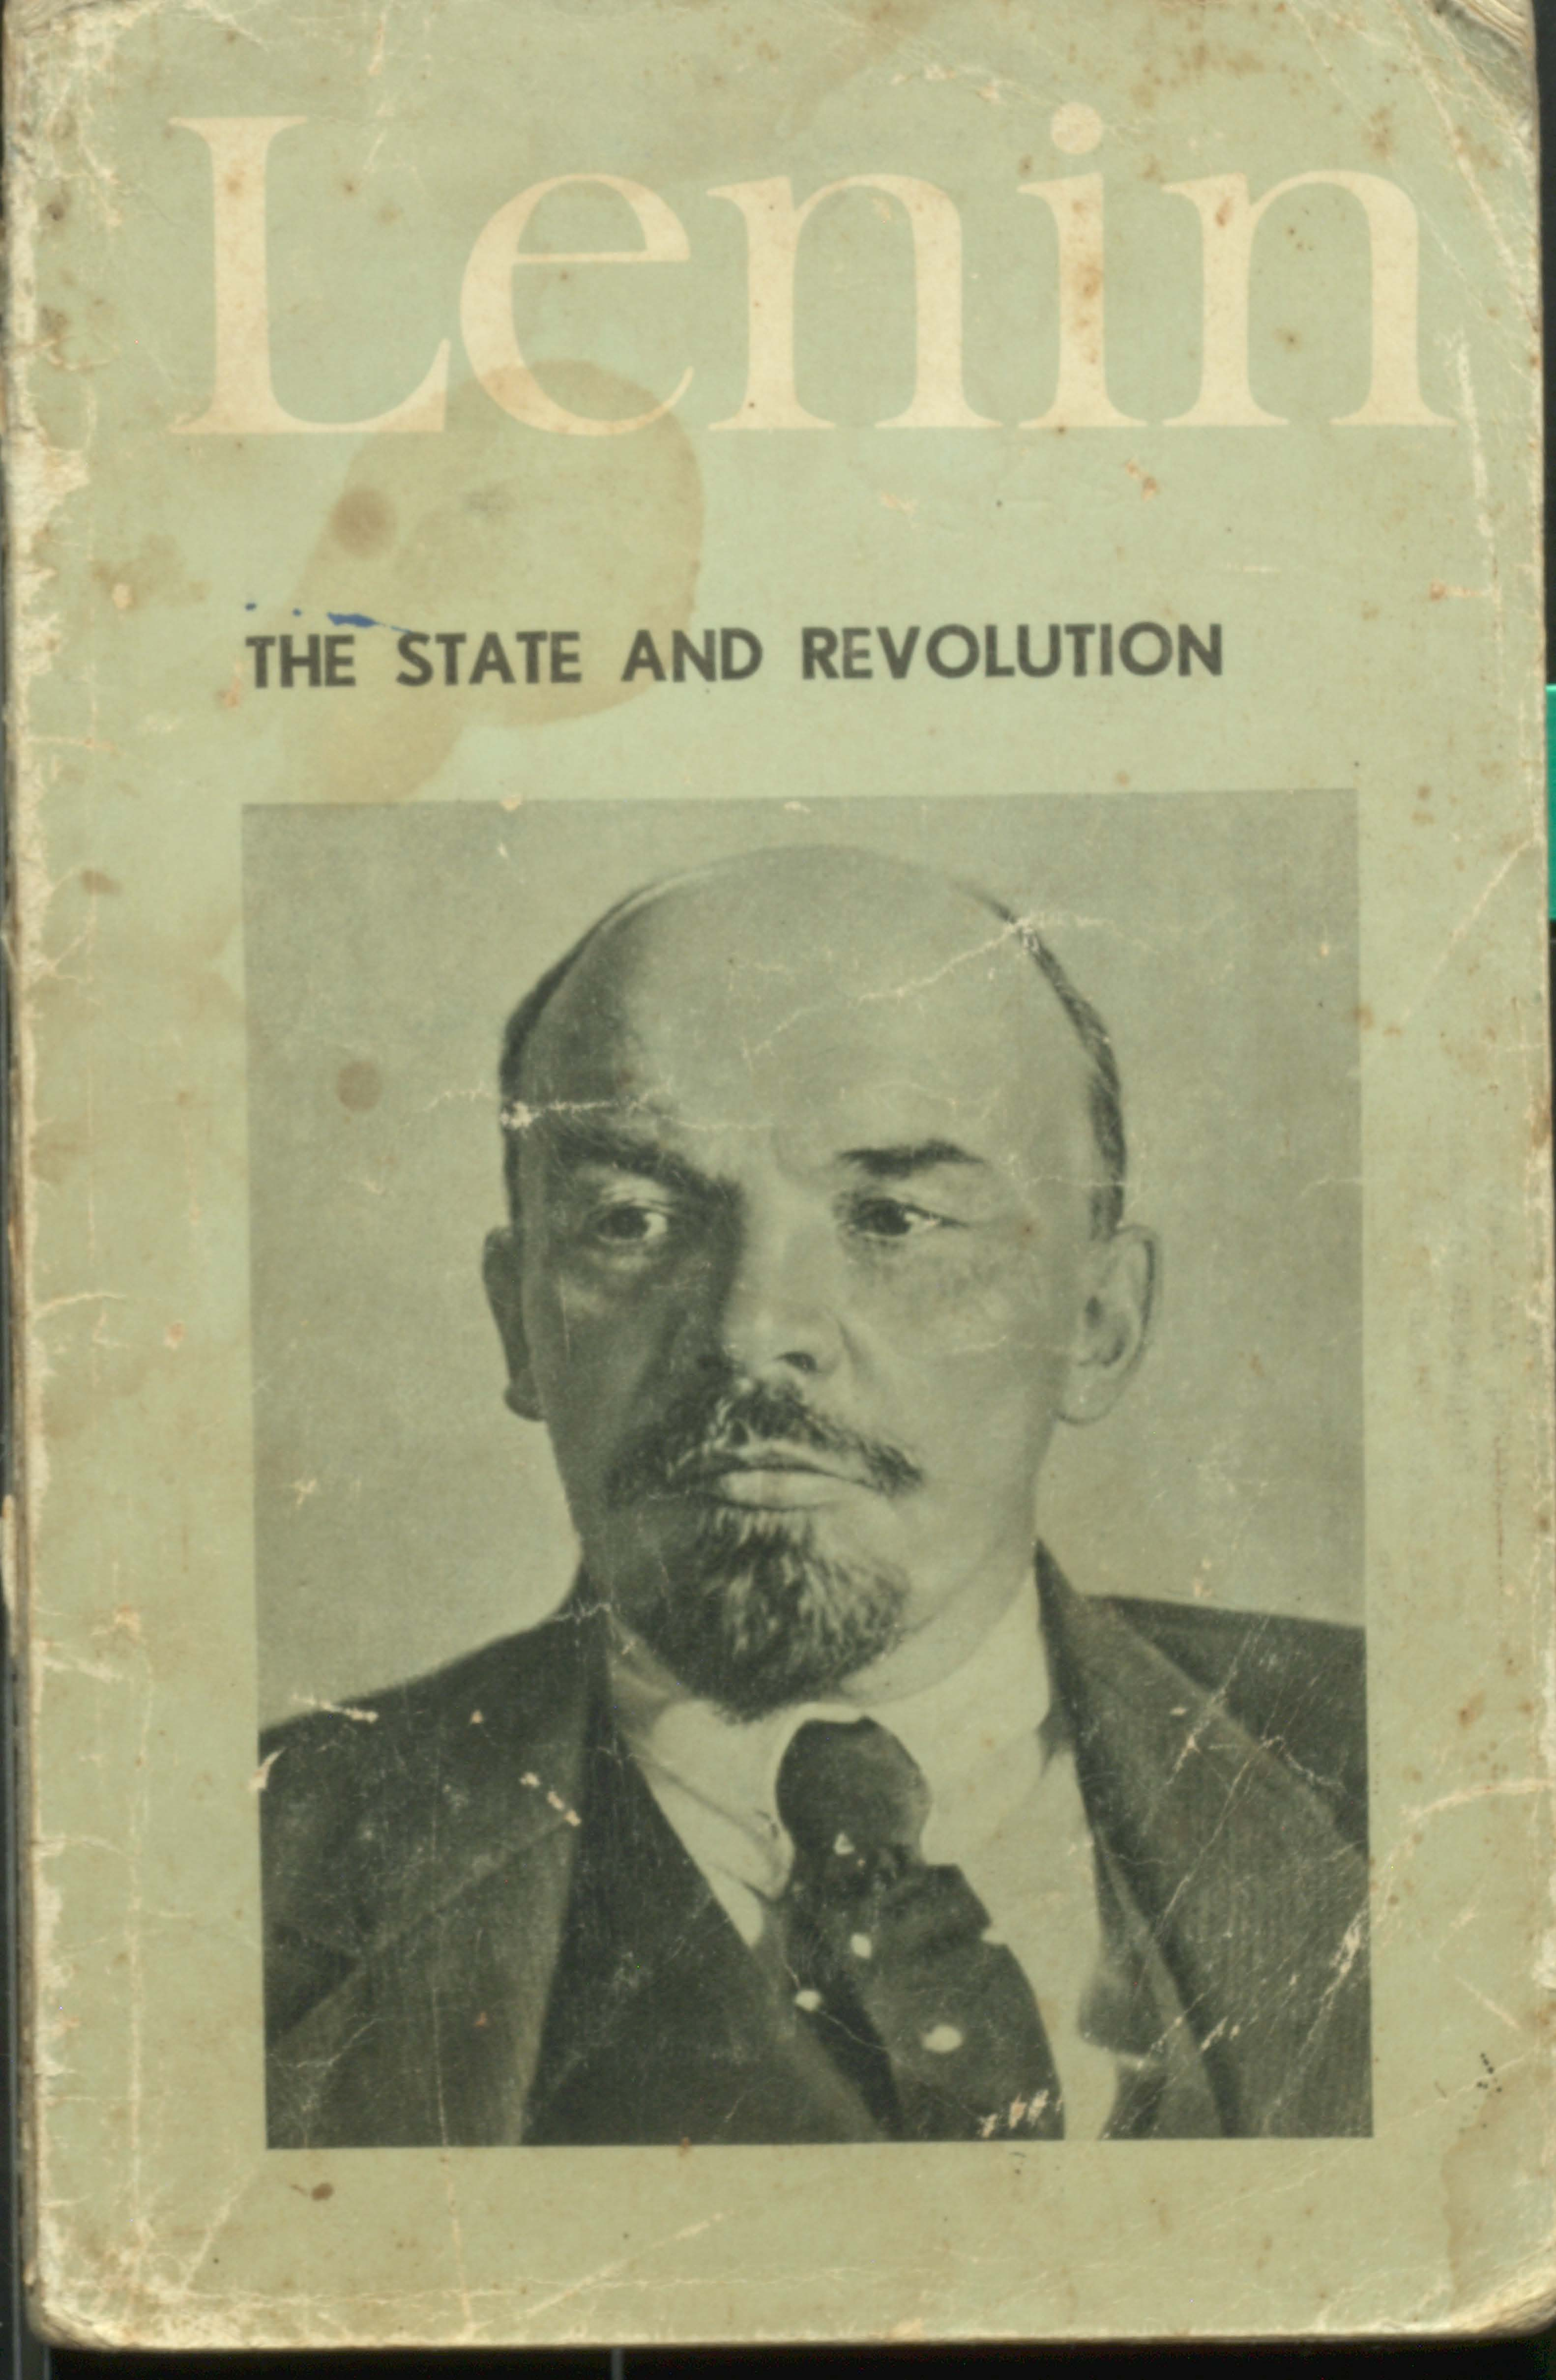 Lenin The State and Revoltion